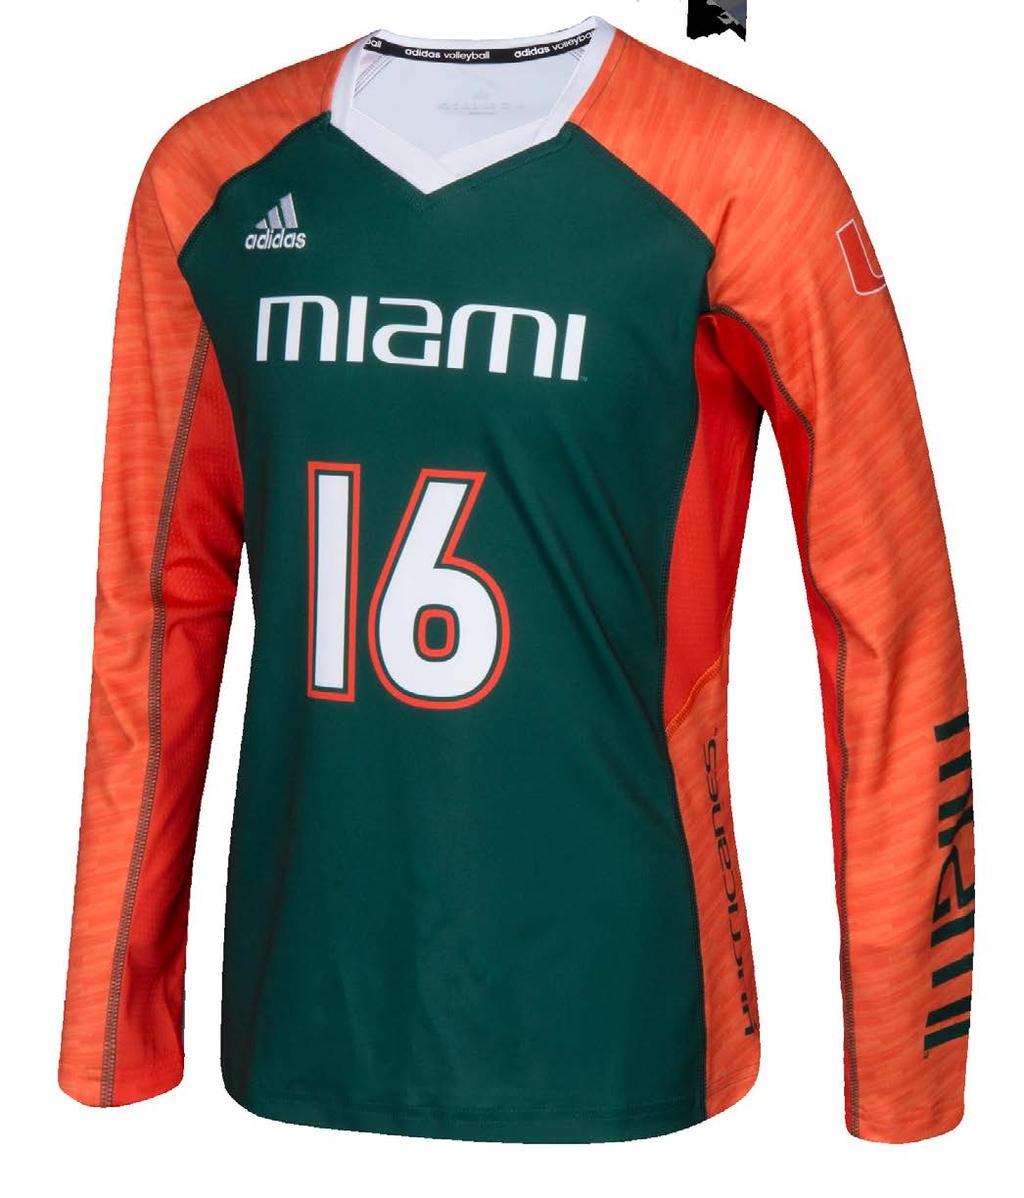 price includes: team name, player name, numbers and Long Sleeve MSRP Article Blank $50 S97270 Sublimated